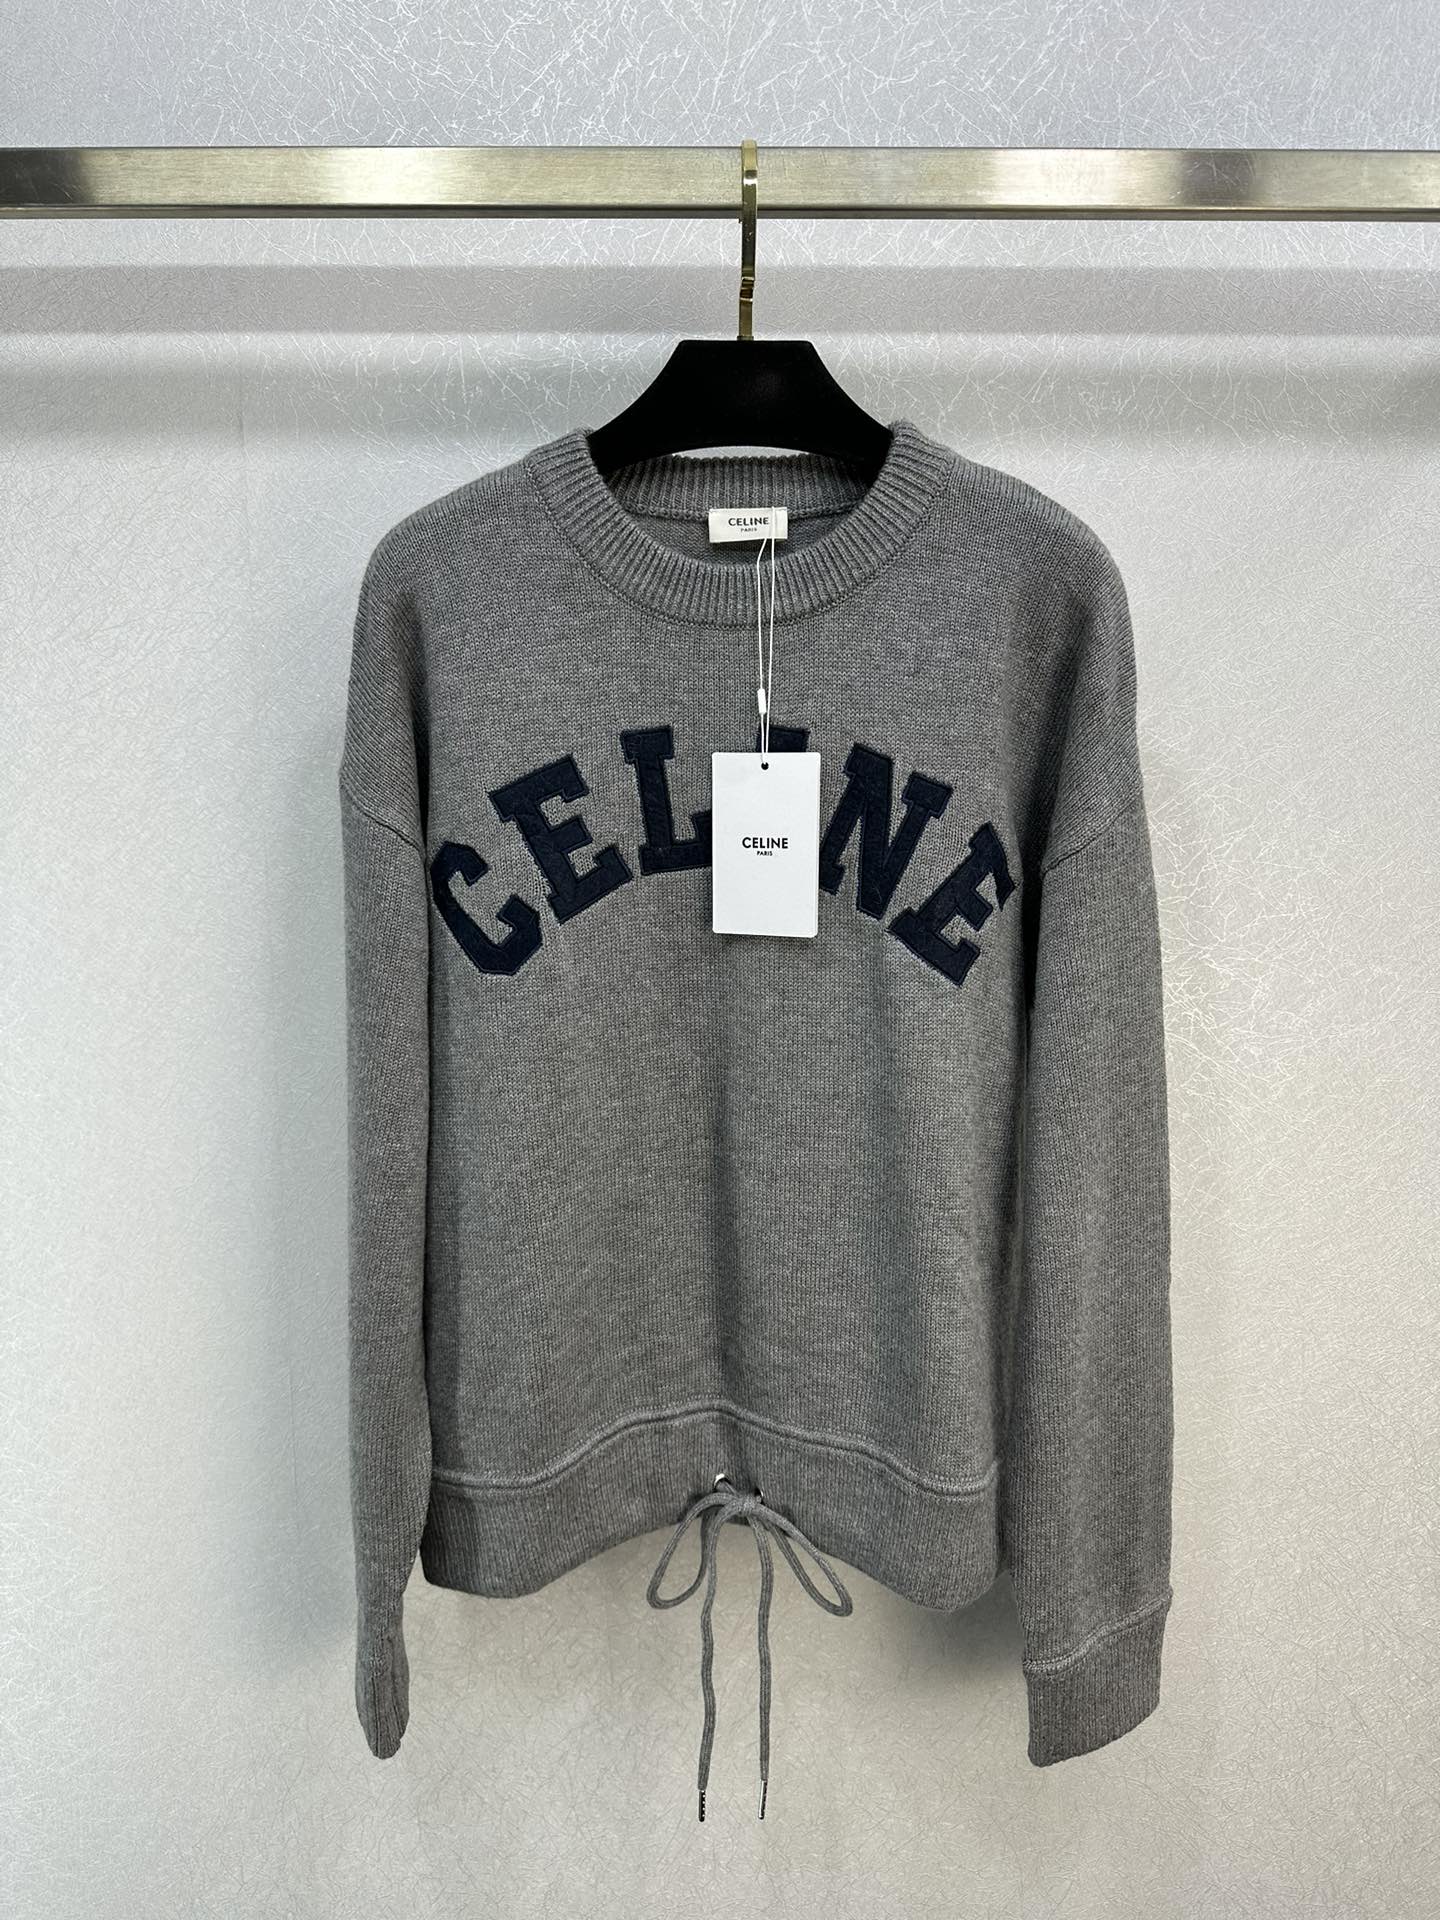 Exclusive Cheap
 Celine Wholesale
 Clothing Shirts & Blouses Embroidery Knitting Fall/Winter Collection Casual